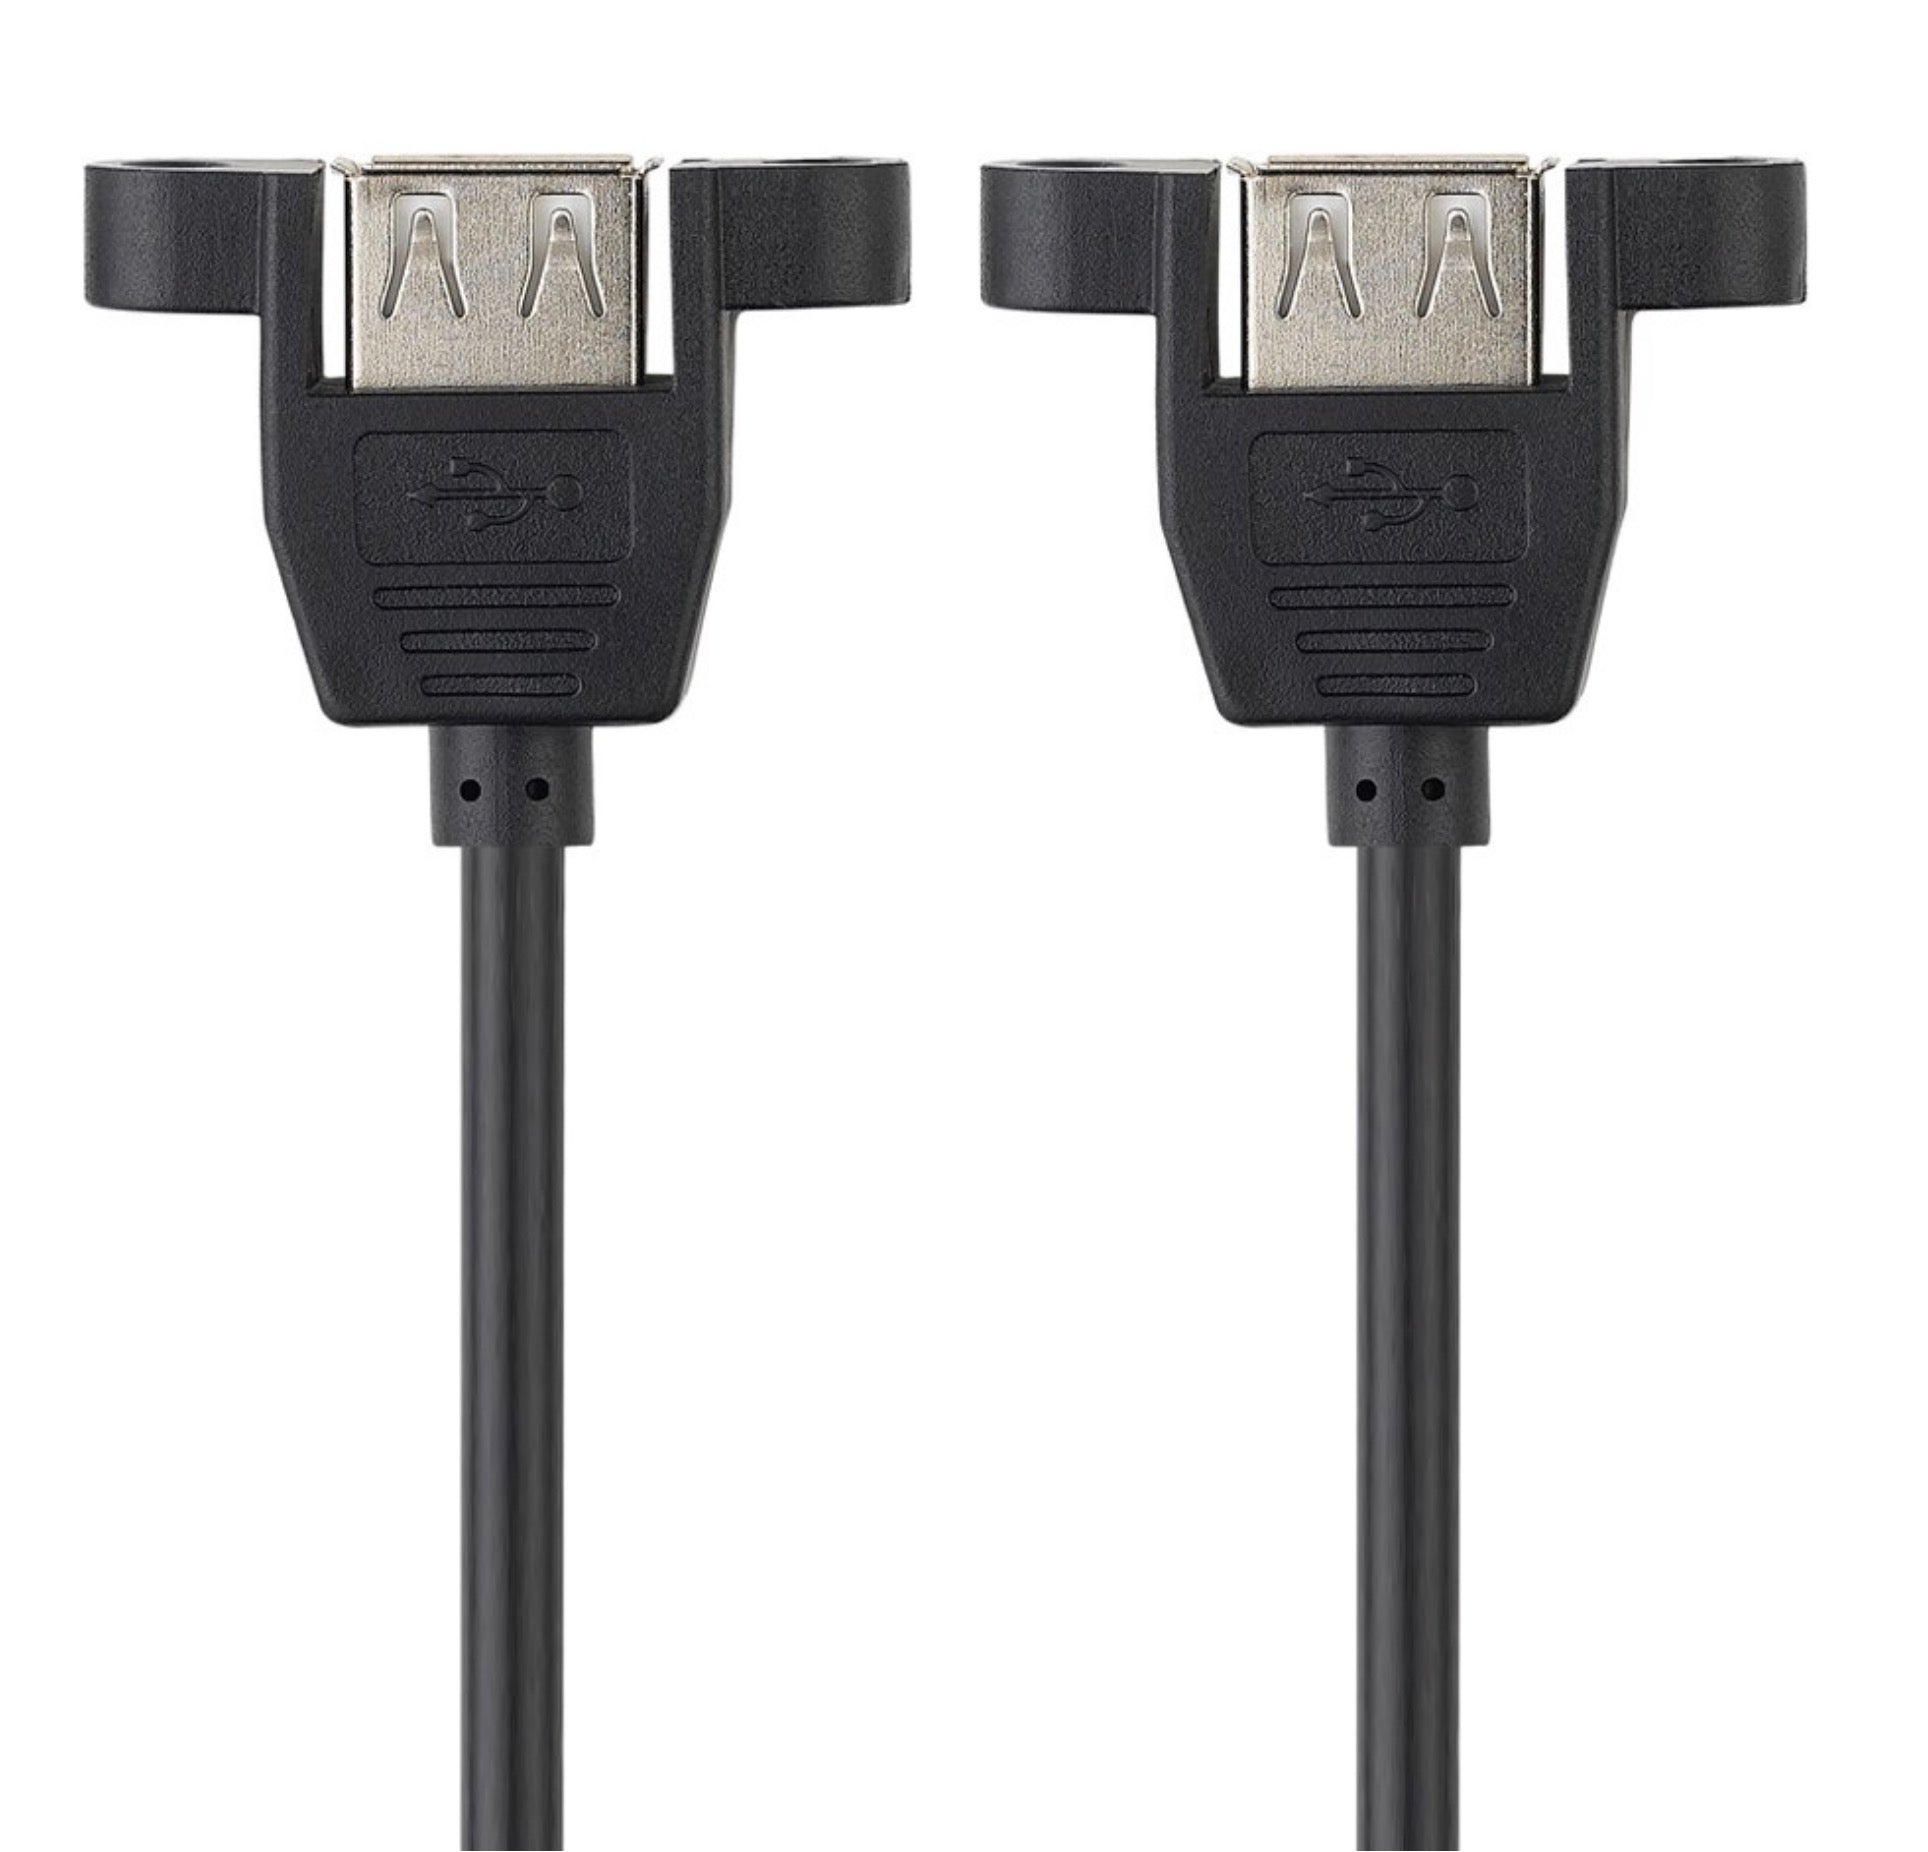 USB 2.0 Type A Female to Female Panel Mount Cable